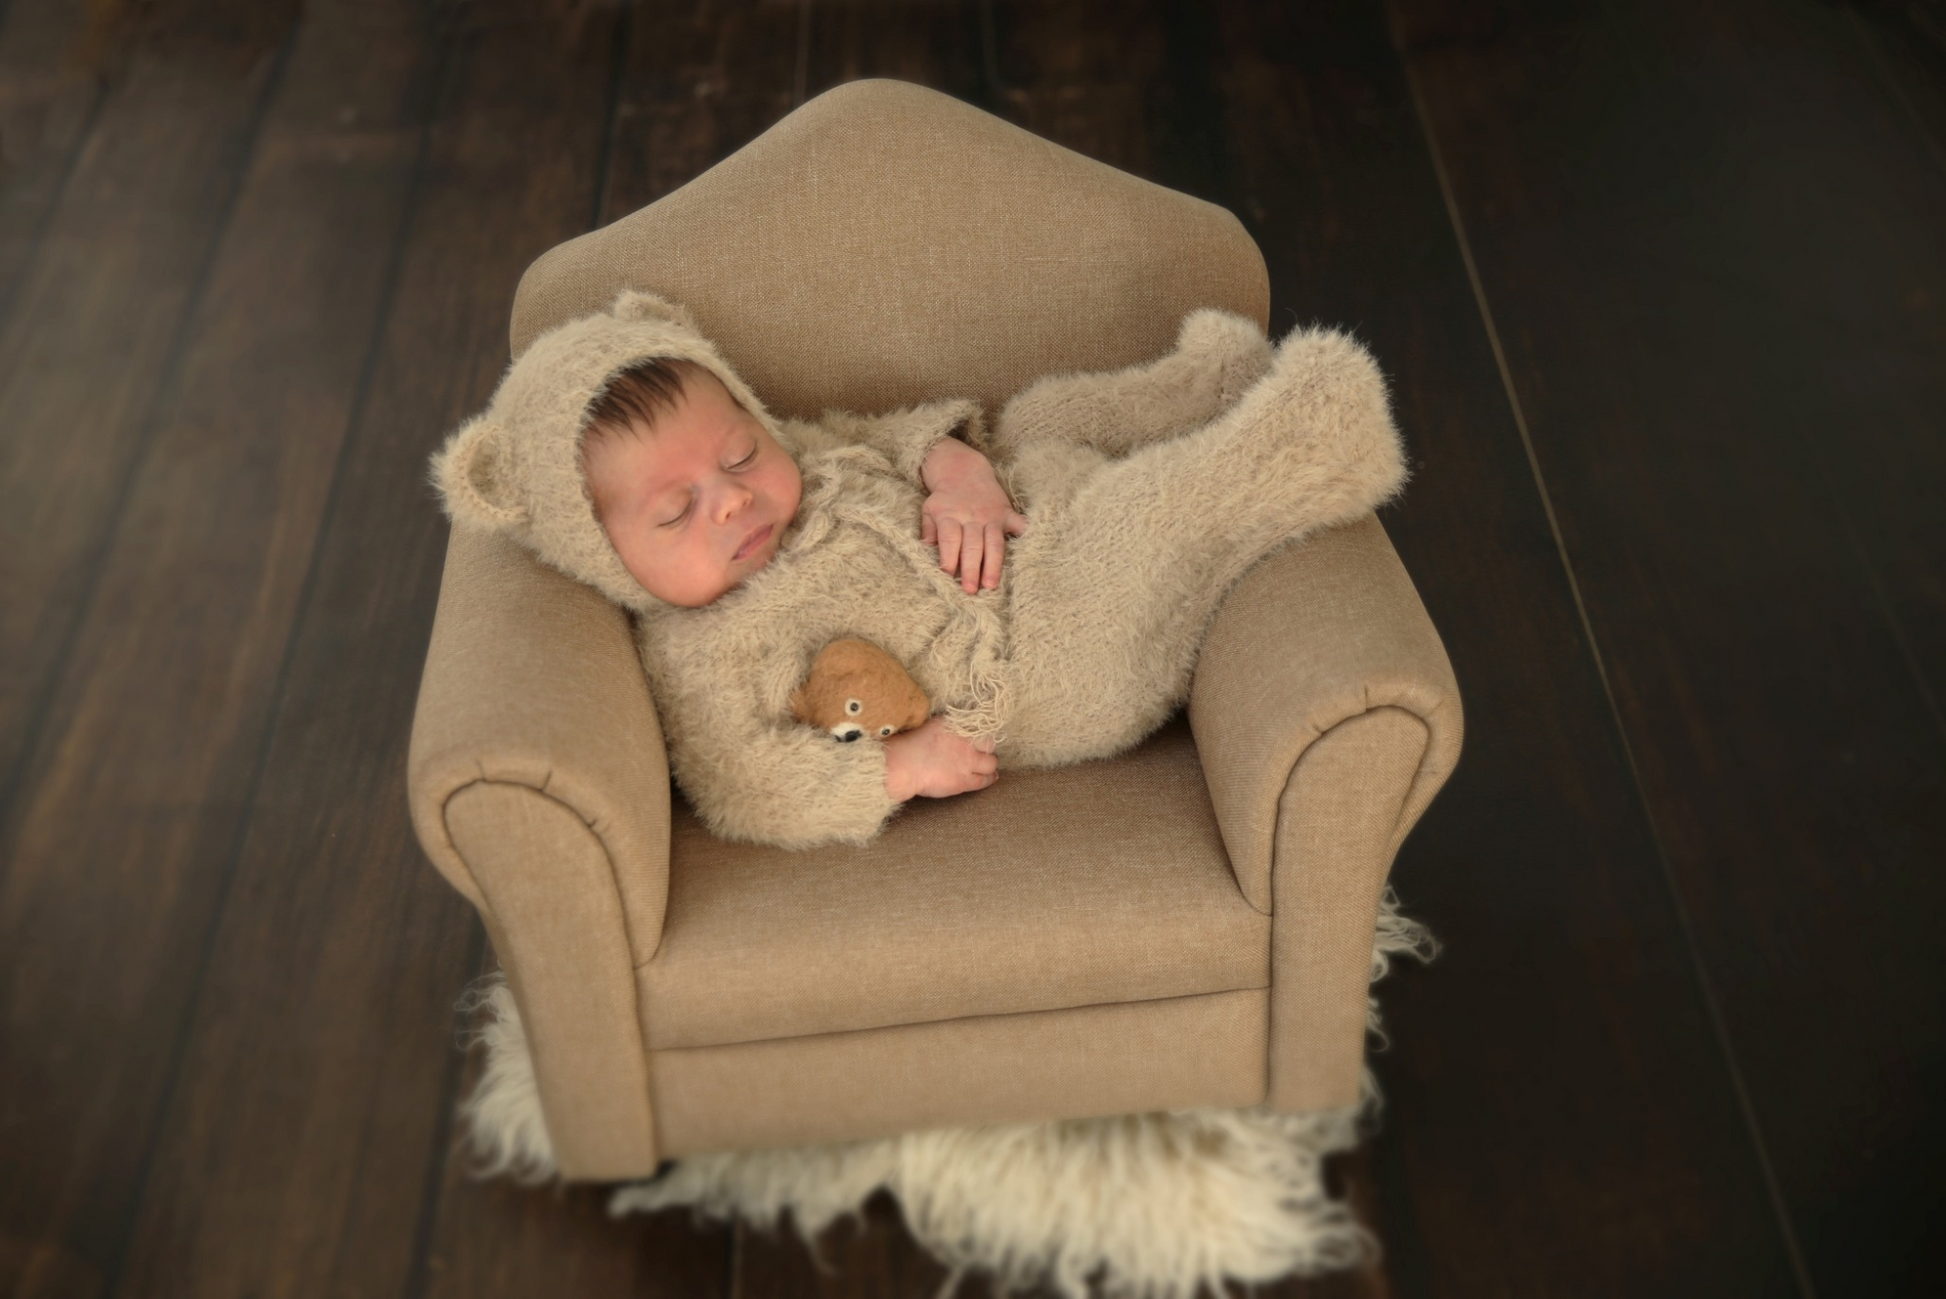 Sleeping baby on a light brown mini sofa, wearing a bear romper and bonnet as a newborn photography prop.